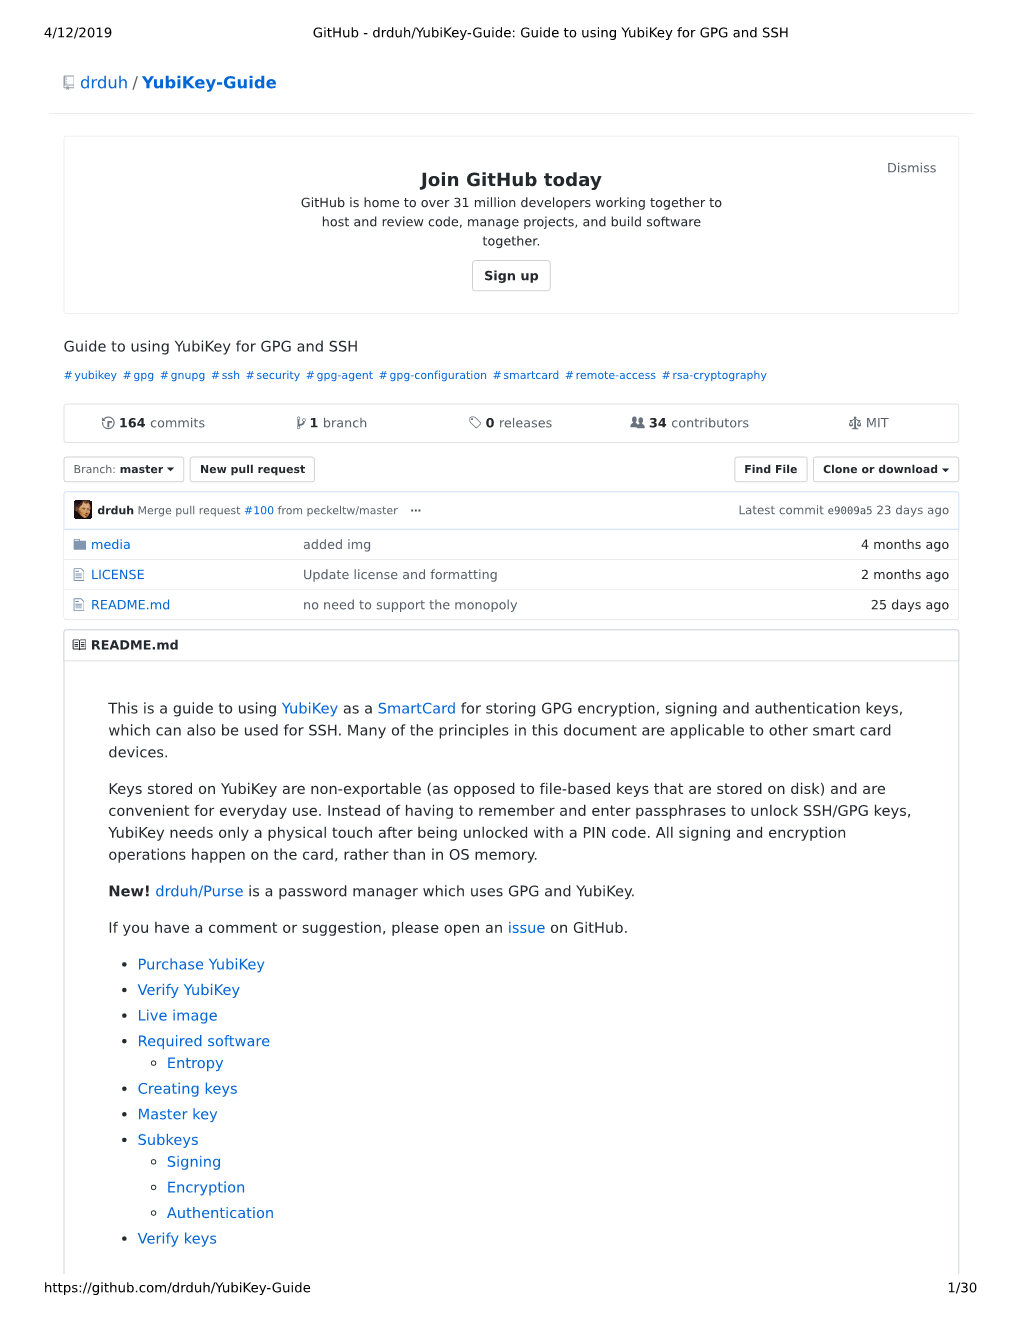 Join Github Today Github Is Home to Over 31 Million Developers Working Together to Host and Review Code, Manage Projects, and Build Software Together